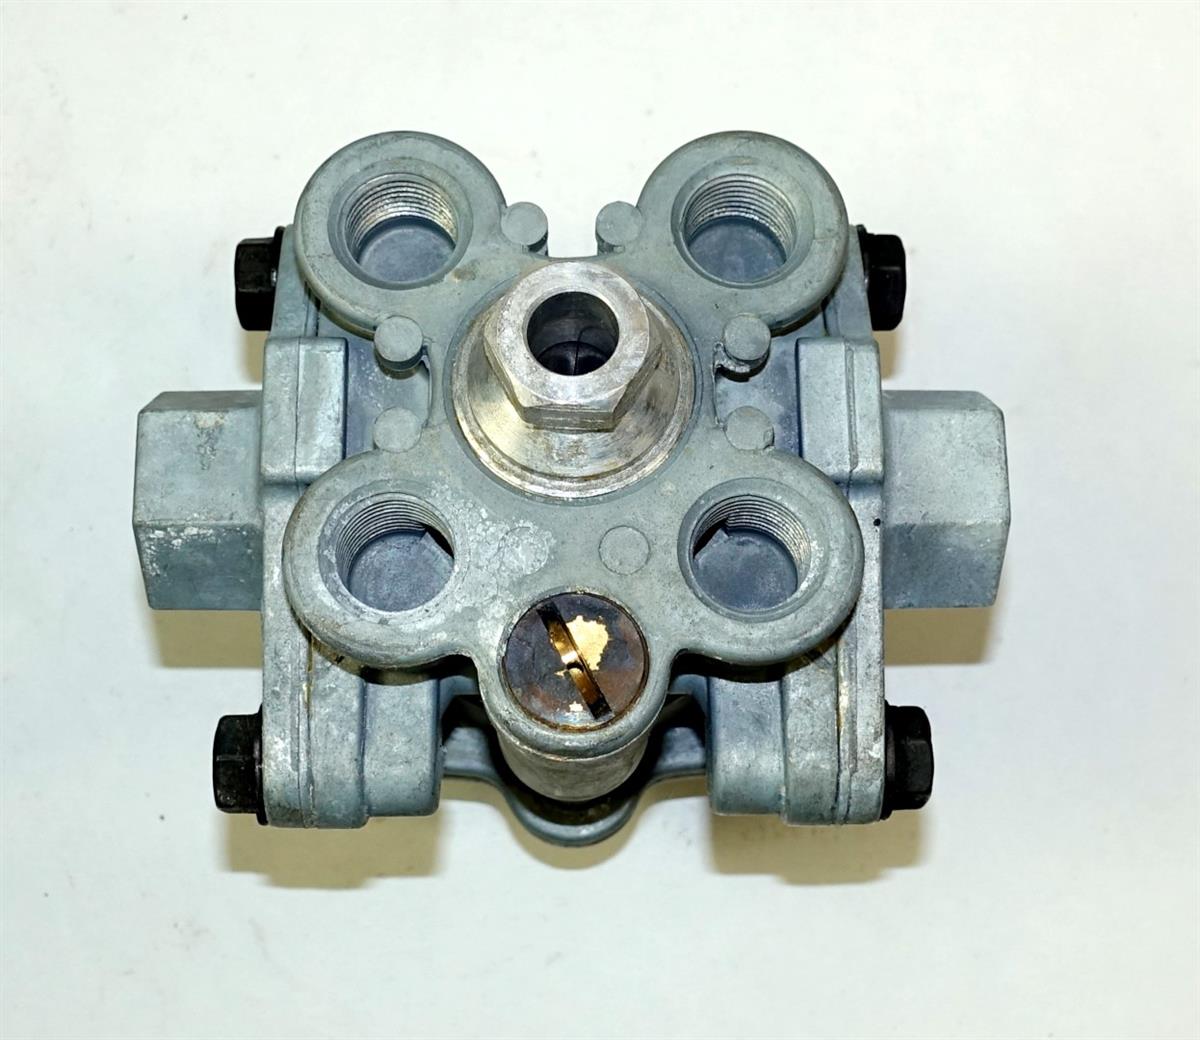 SP-1989 | 2530-01-358-6041 Spring Brake Control Valve for Commercial Trucks and Trailers NOS (1).JPG